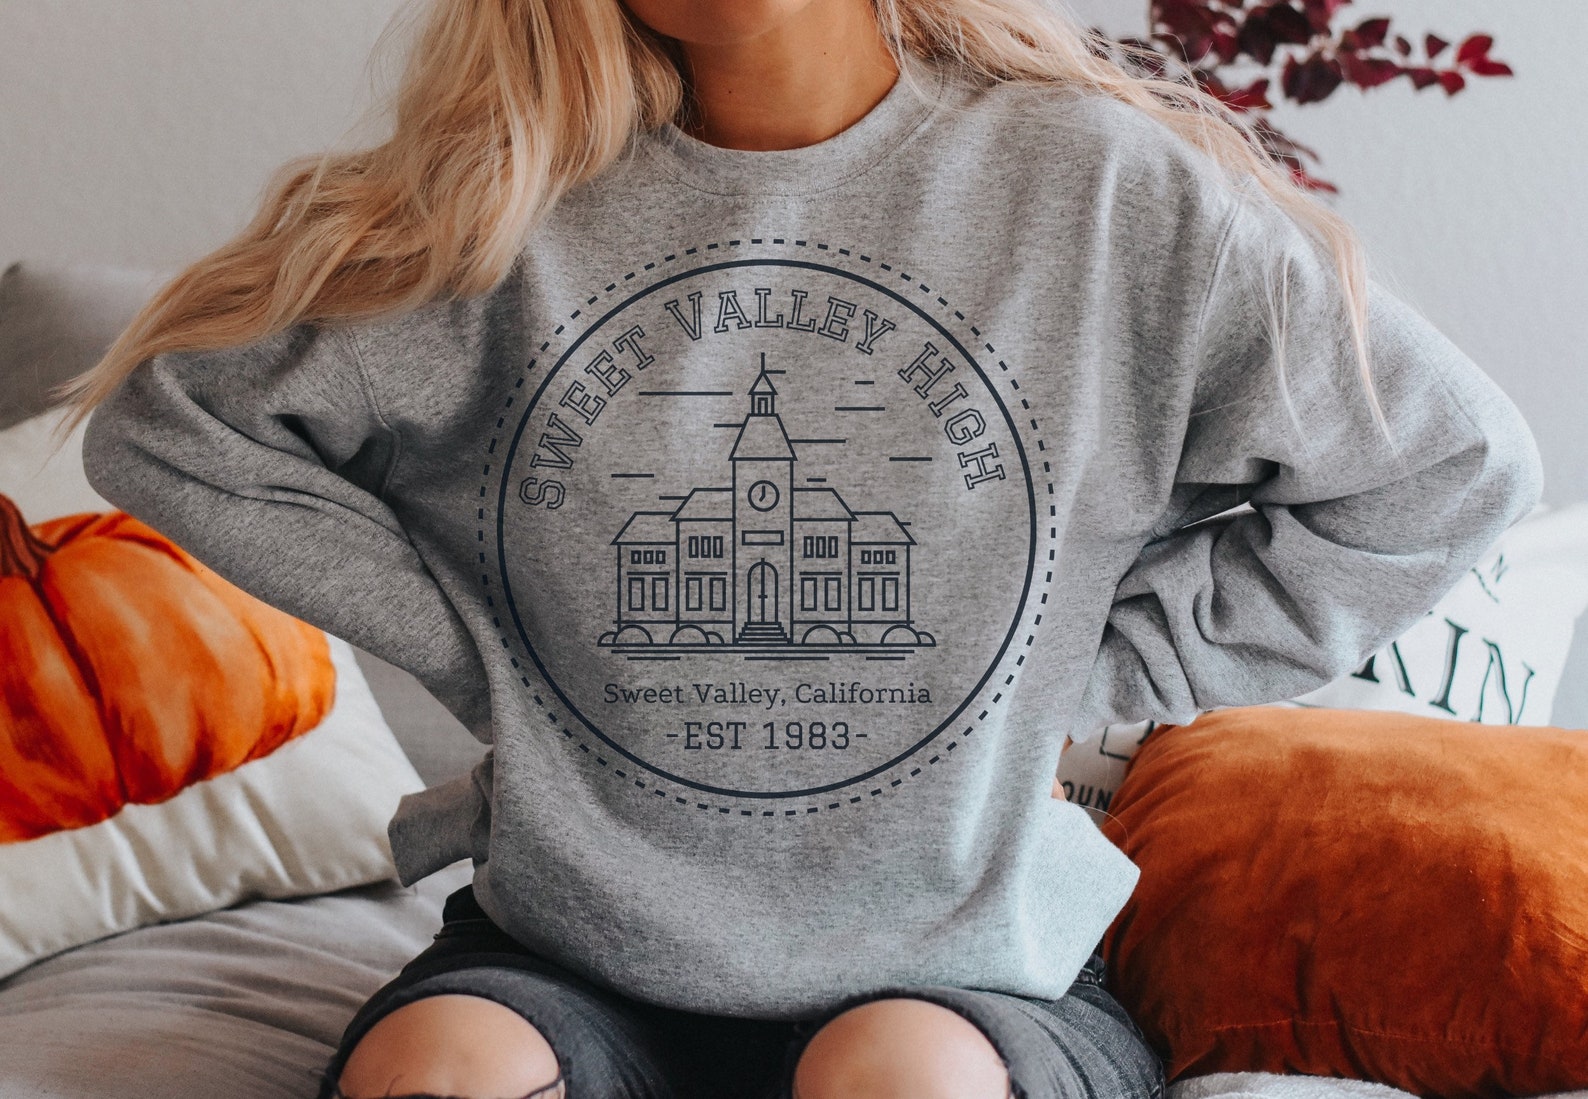 Image of a white person in a gray sweatshirt that reads "Sweet Valley High, Sweet Valley, California, Established 1983".